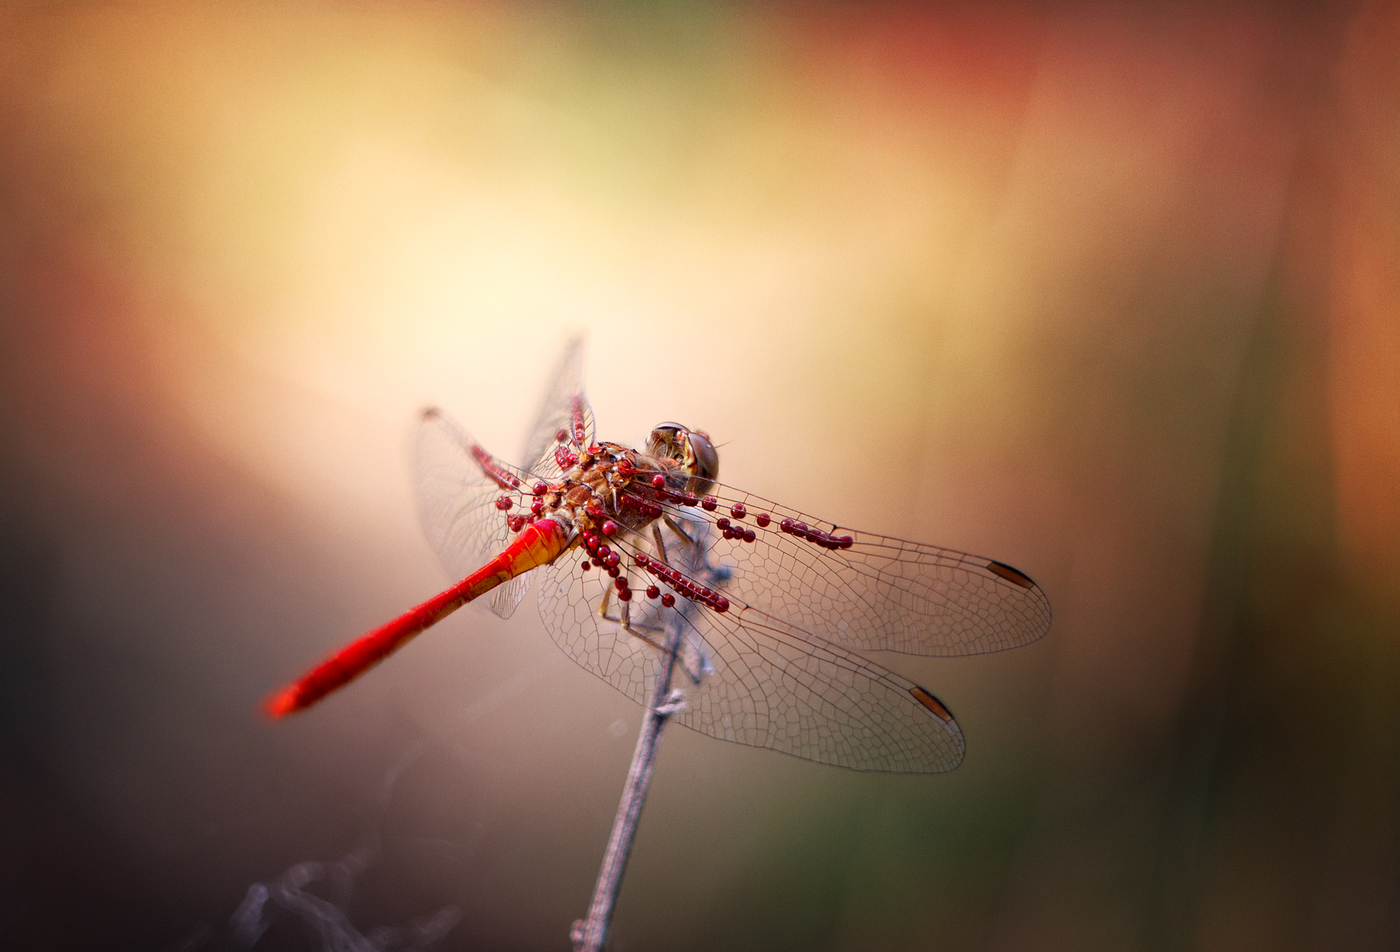 Dragonflies have enemies; on the wings of the larva of the parasite - mite